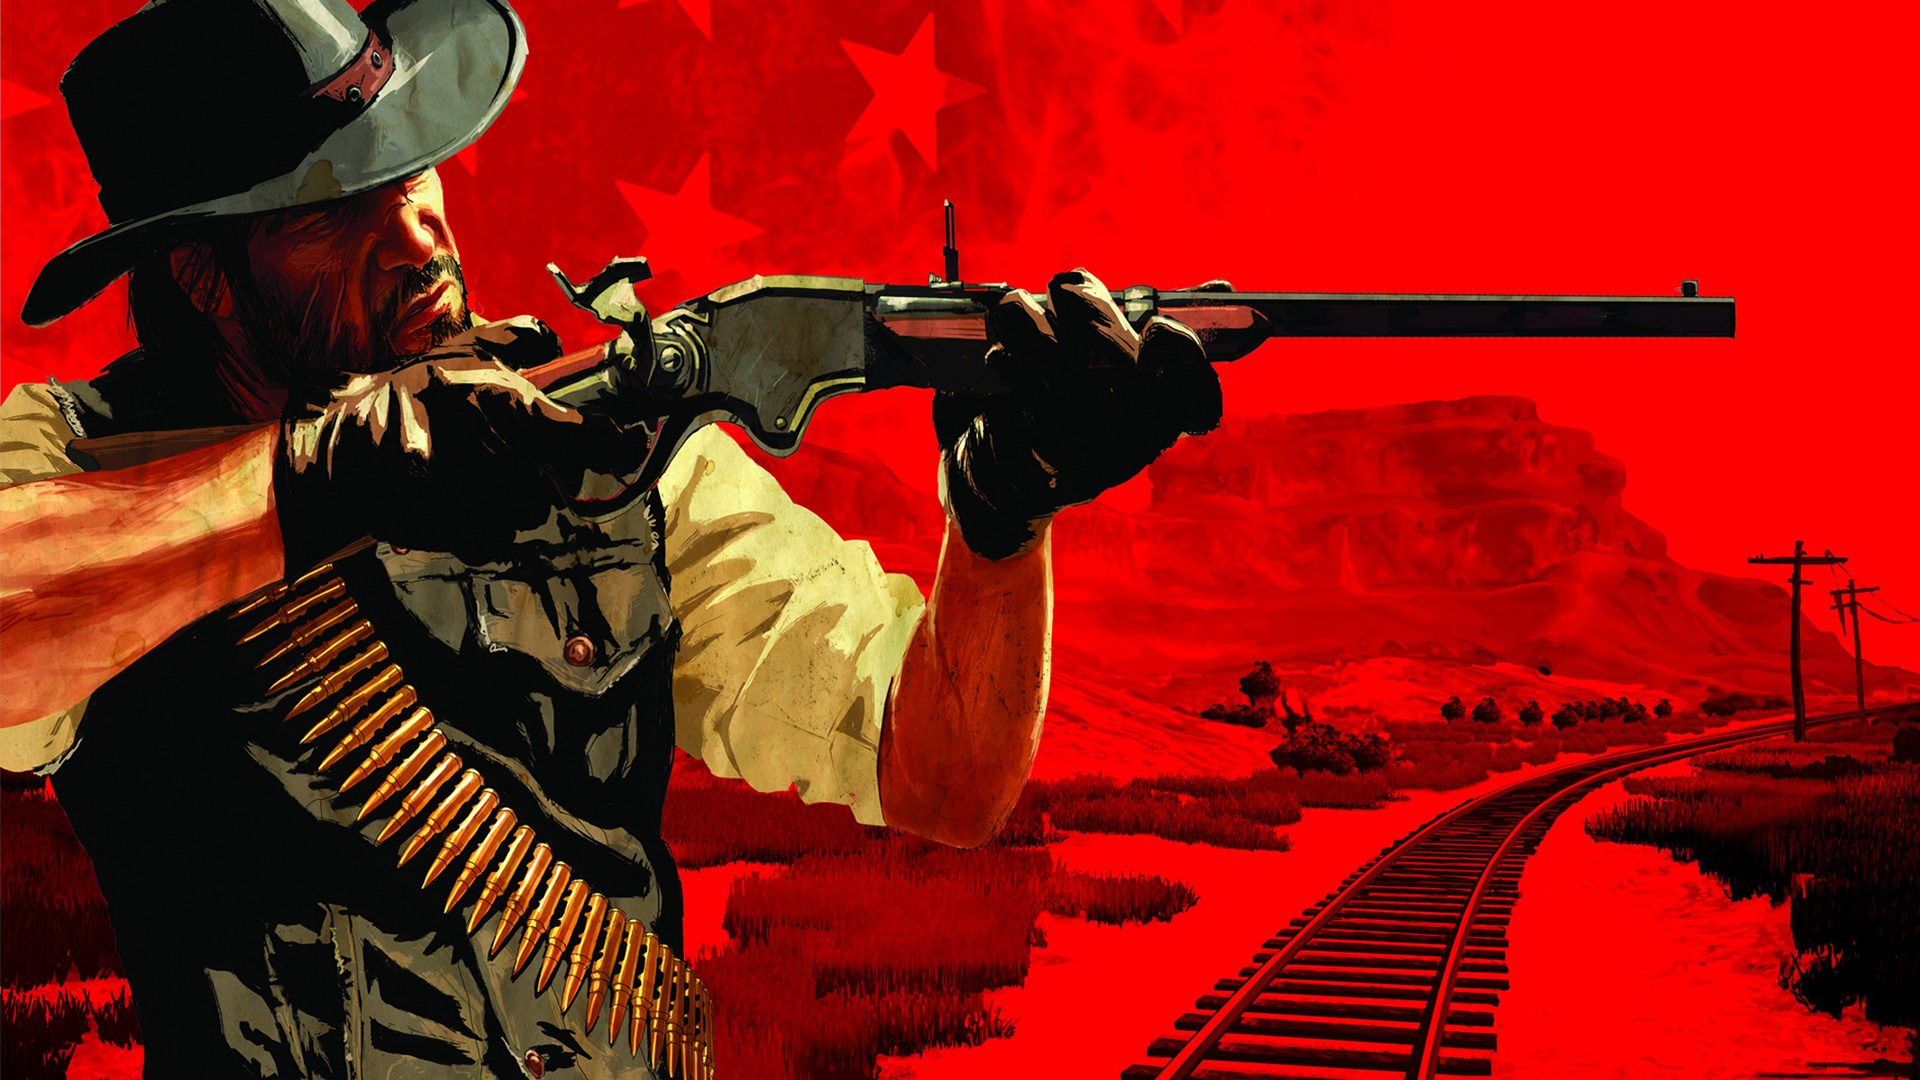 Exciting Update Is Red Dead Redemption 3 Finally on the Horizon Fans Eagerly Await News of the Next Western Epic